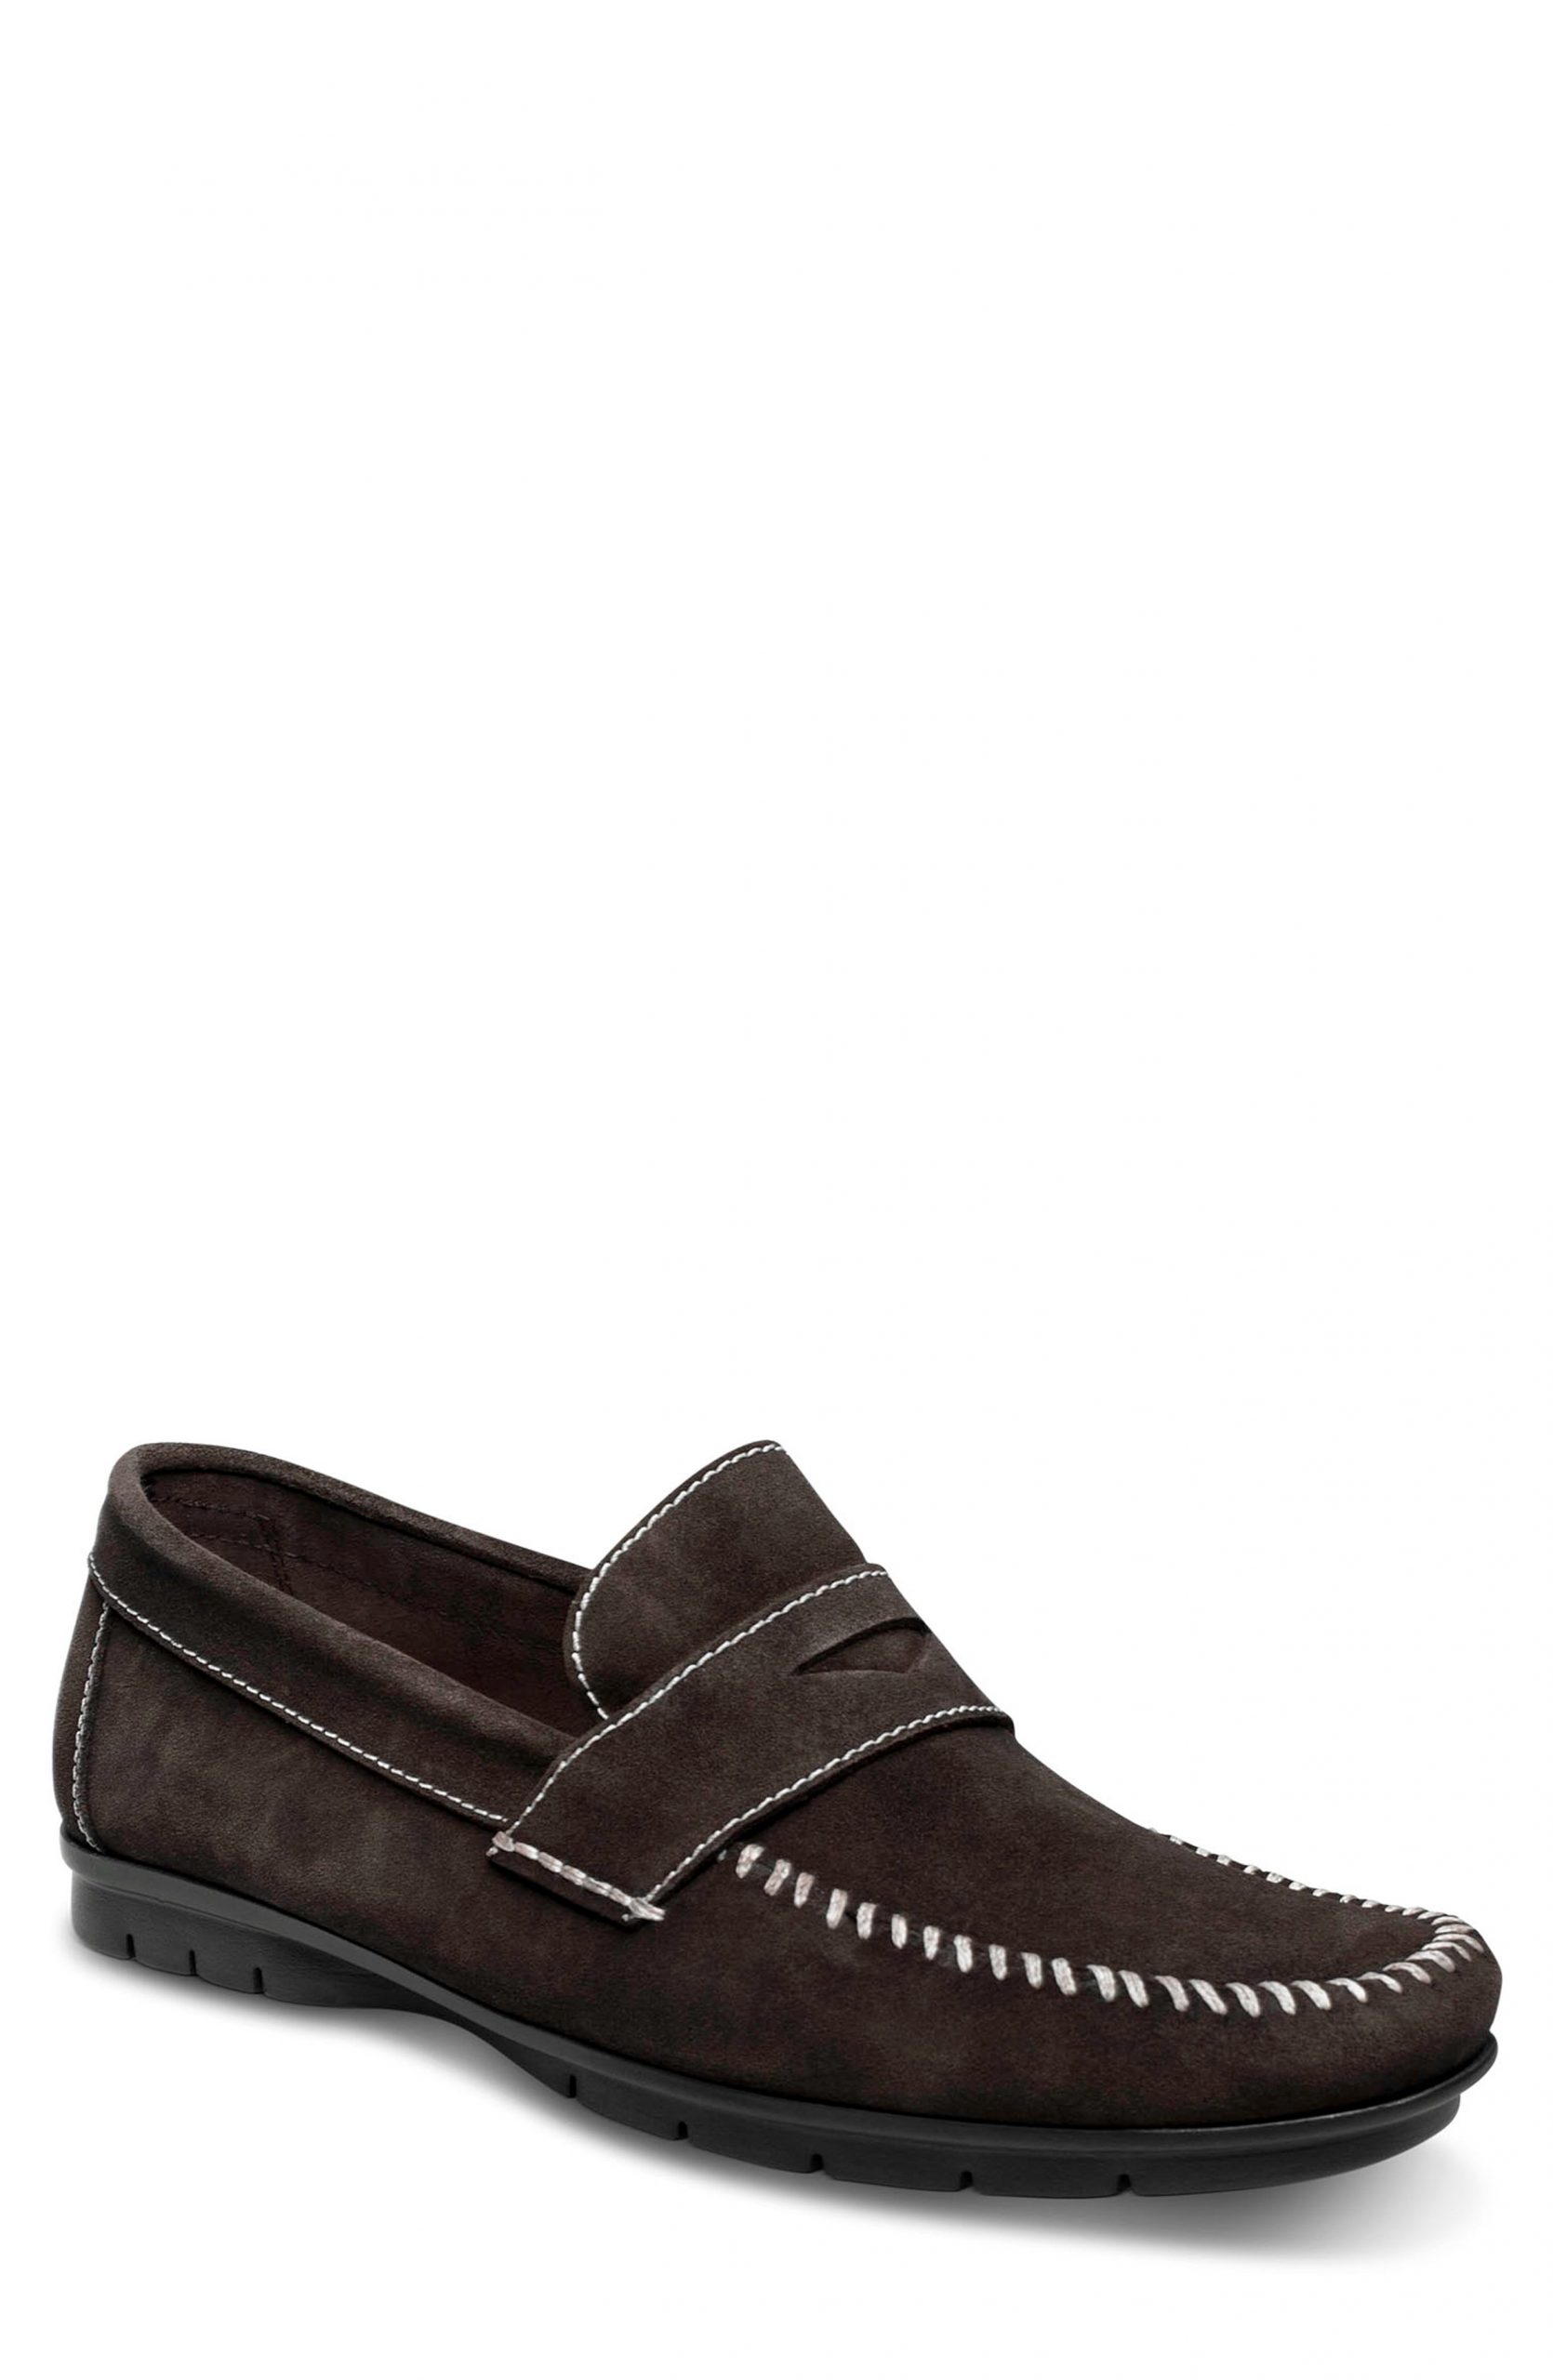 Men’s Sandro Moscoloni Miguel Driving Shoe, Size 7.5 D - Brown | The ...